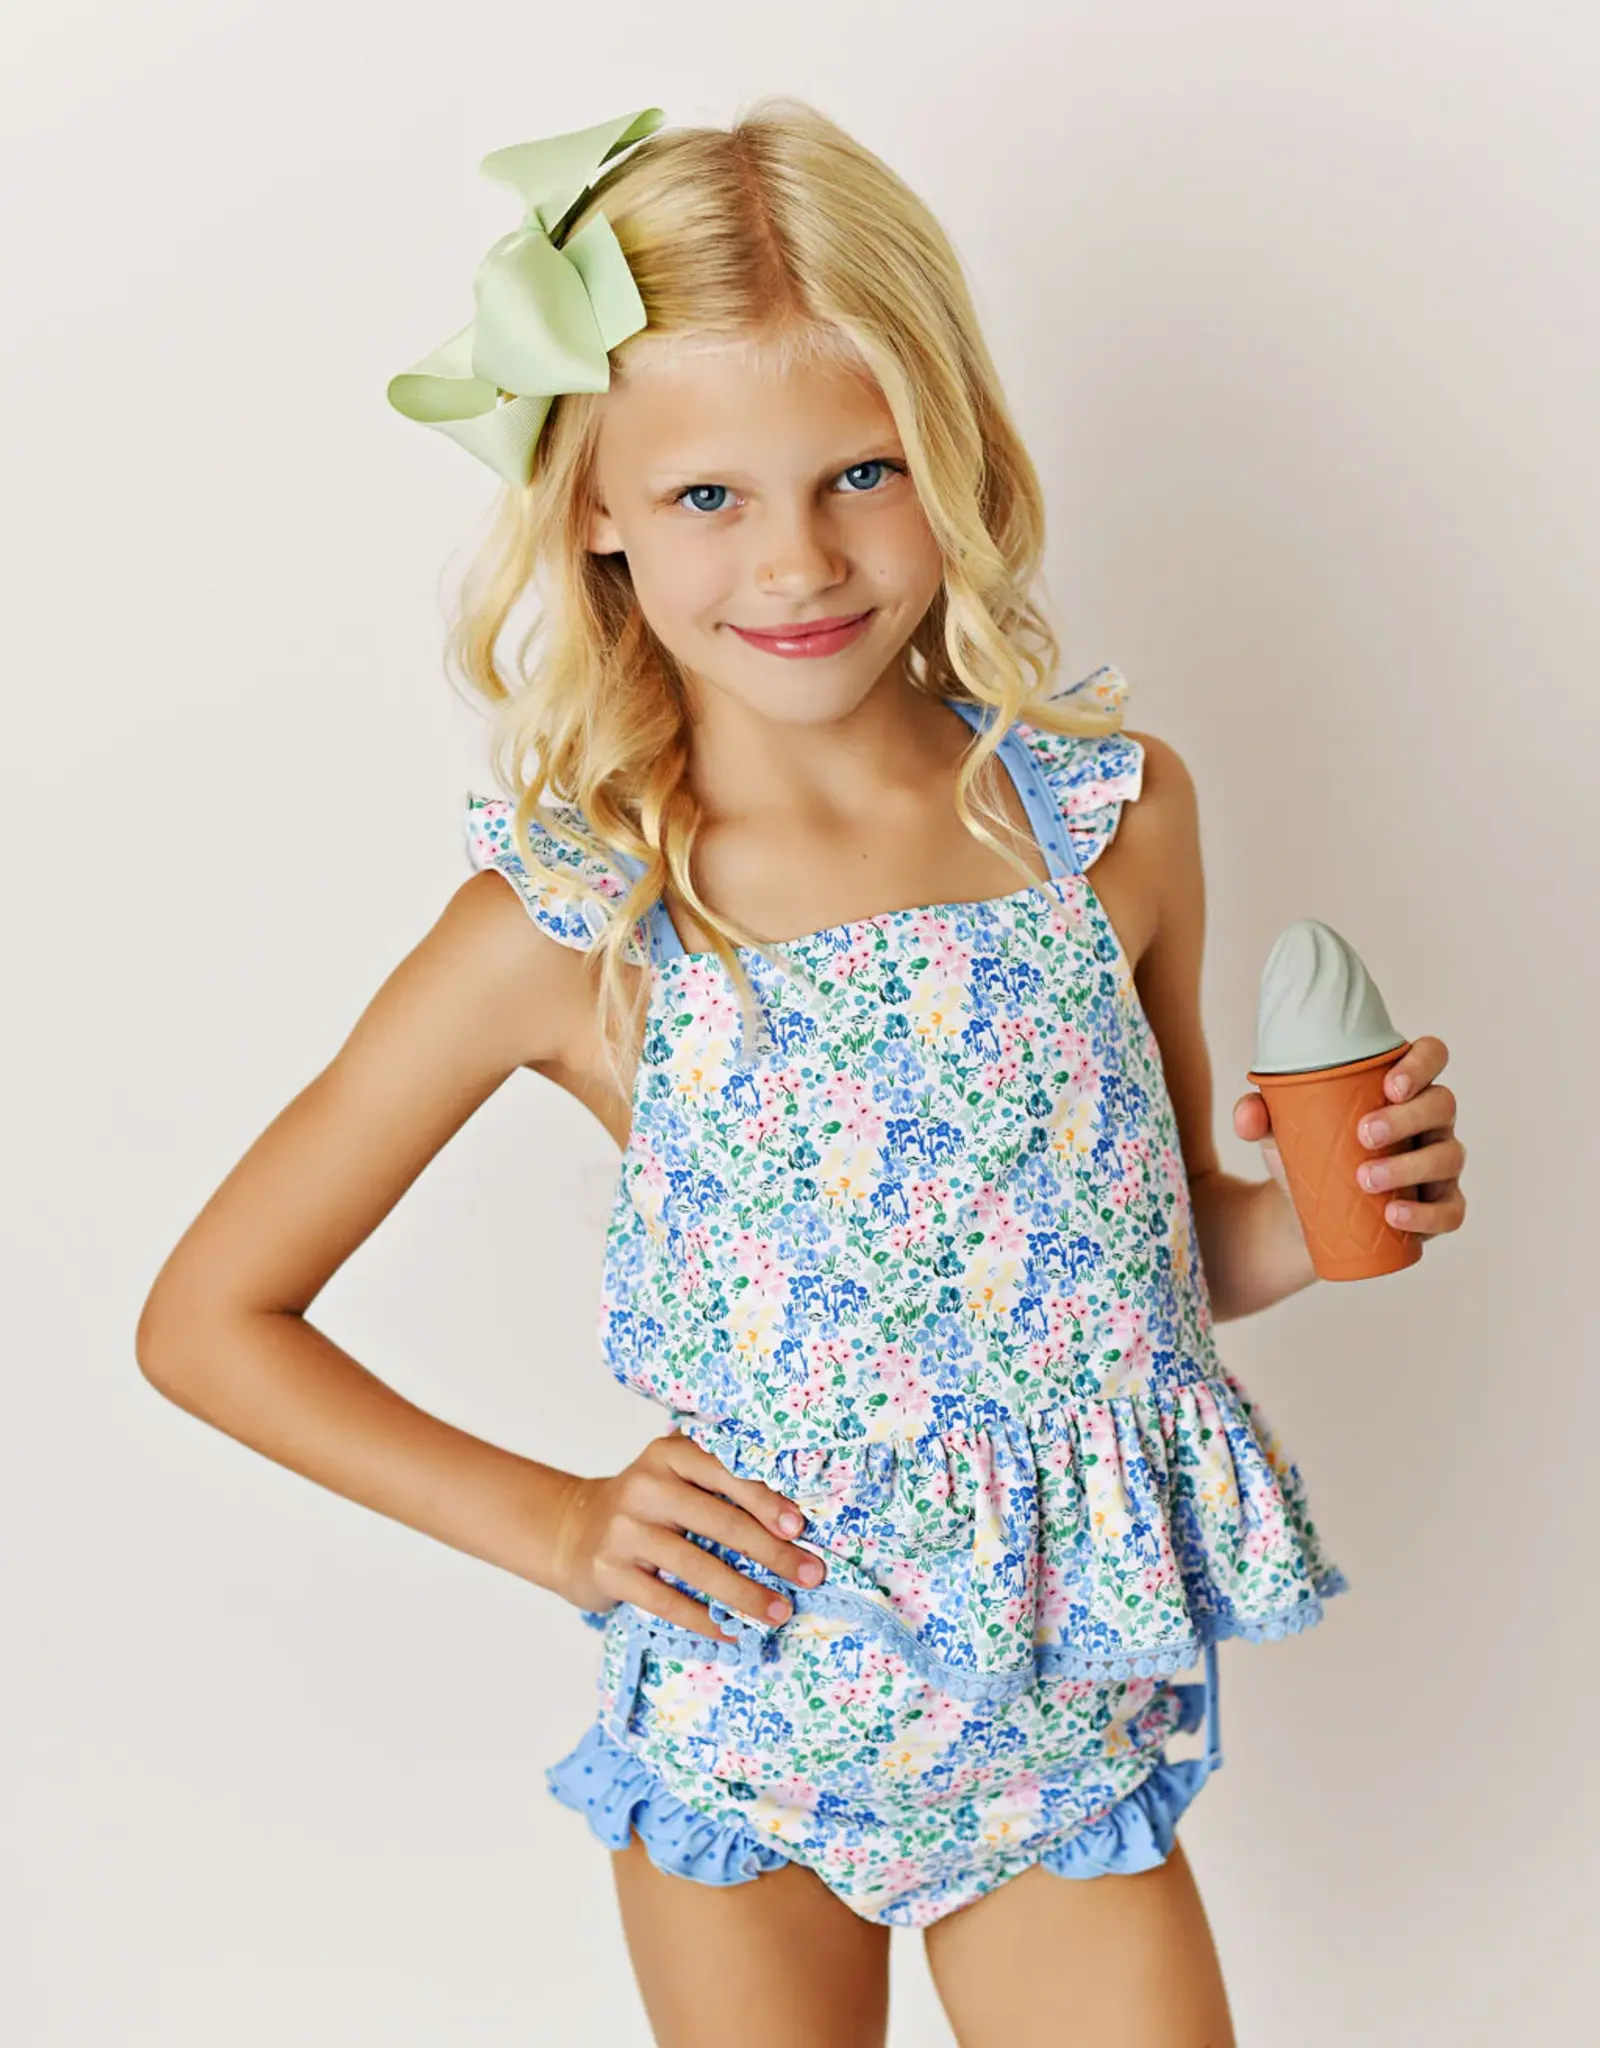 Swoon Baby 2414 Tunic Blue Floral 2 pc Swimsuit